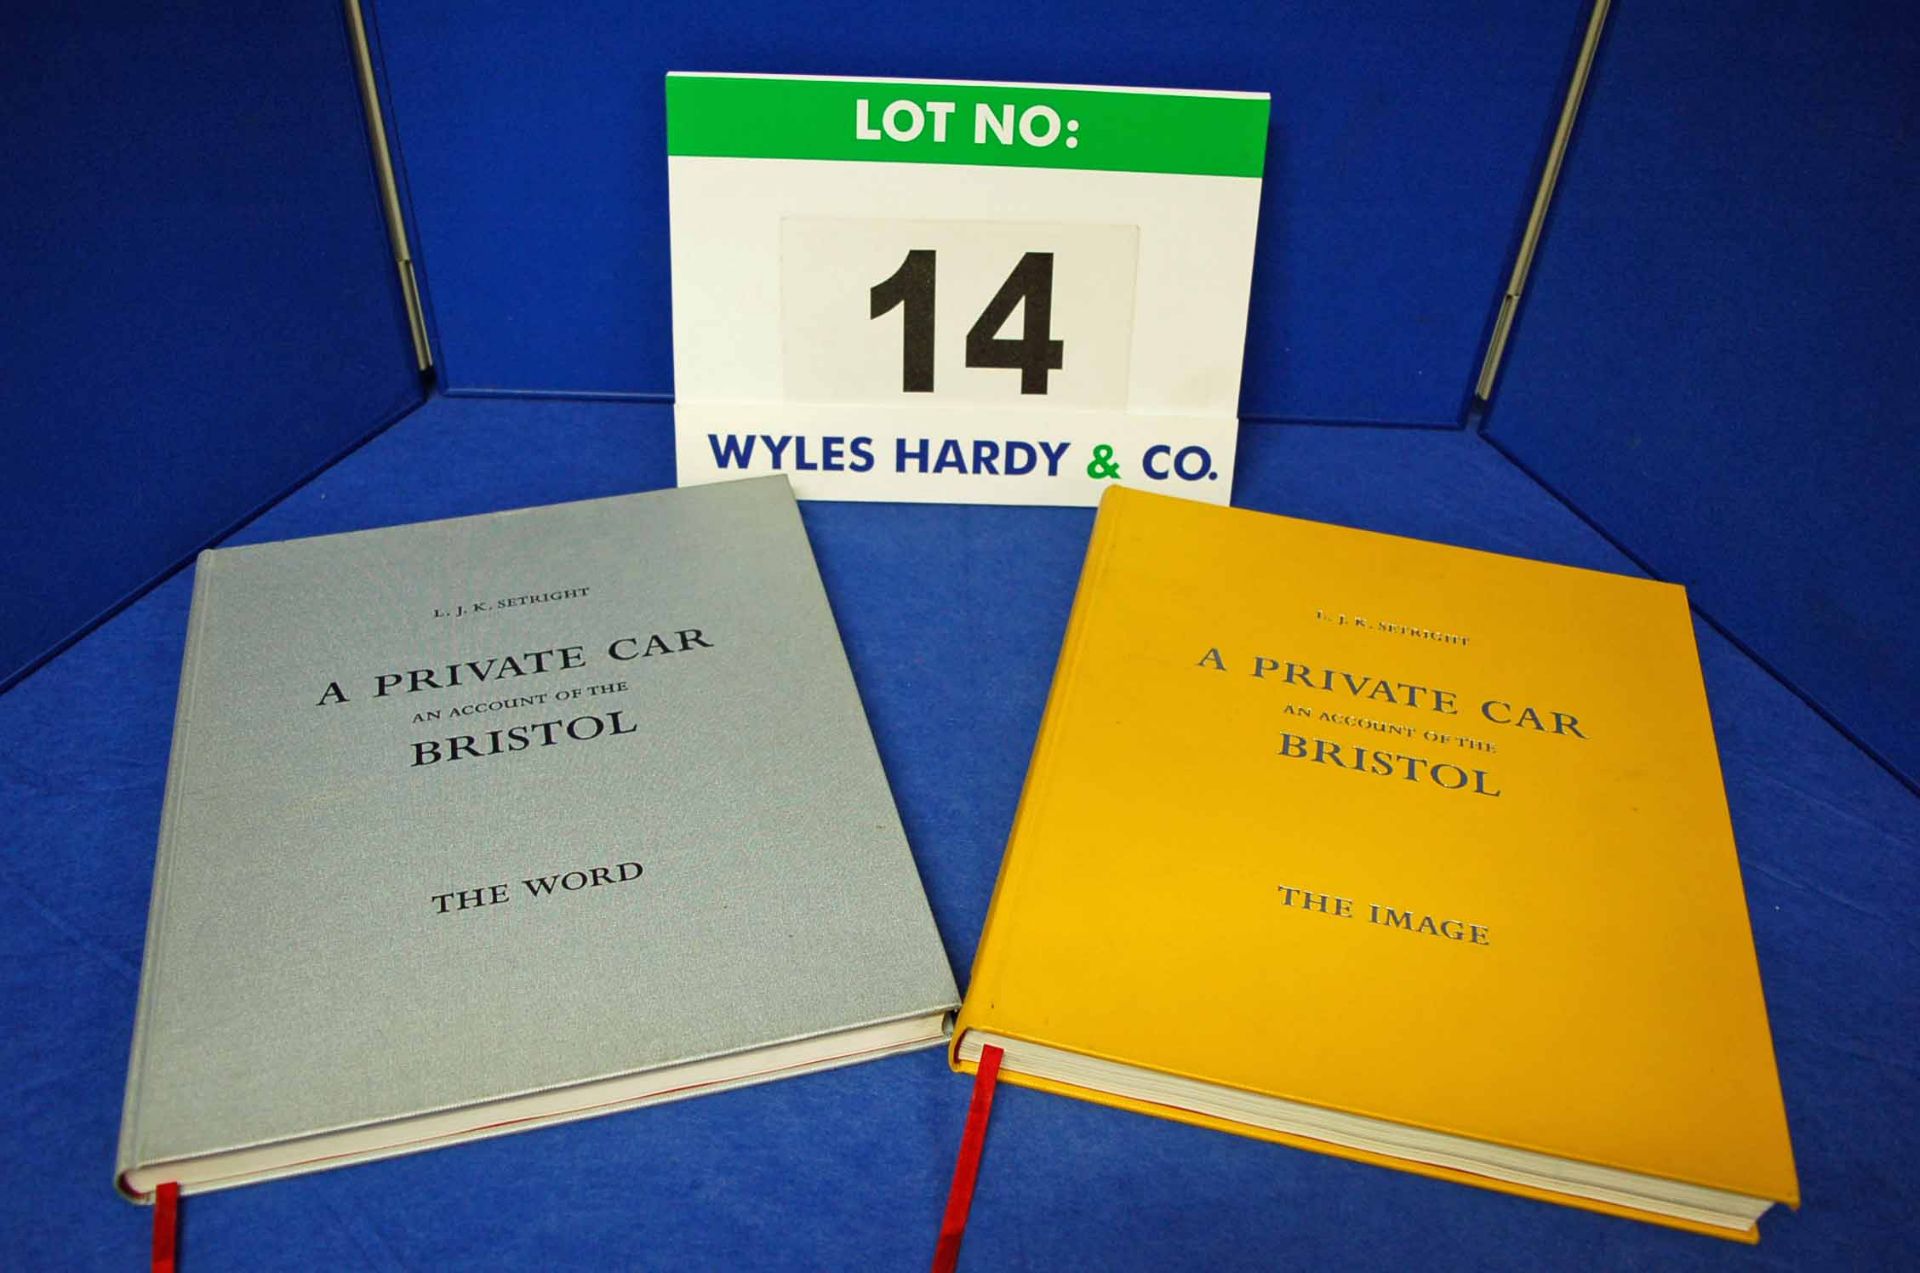 A Copy (Two Volumes) of A Private Car, an Account of the Bristol by LJK Setright comprising 'The